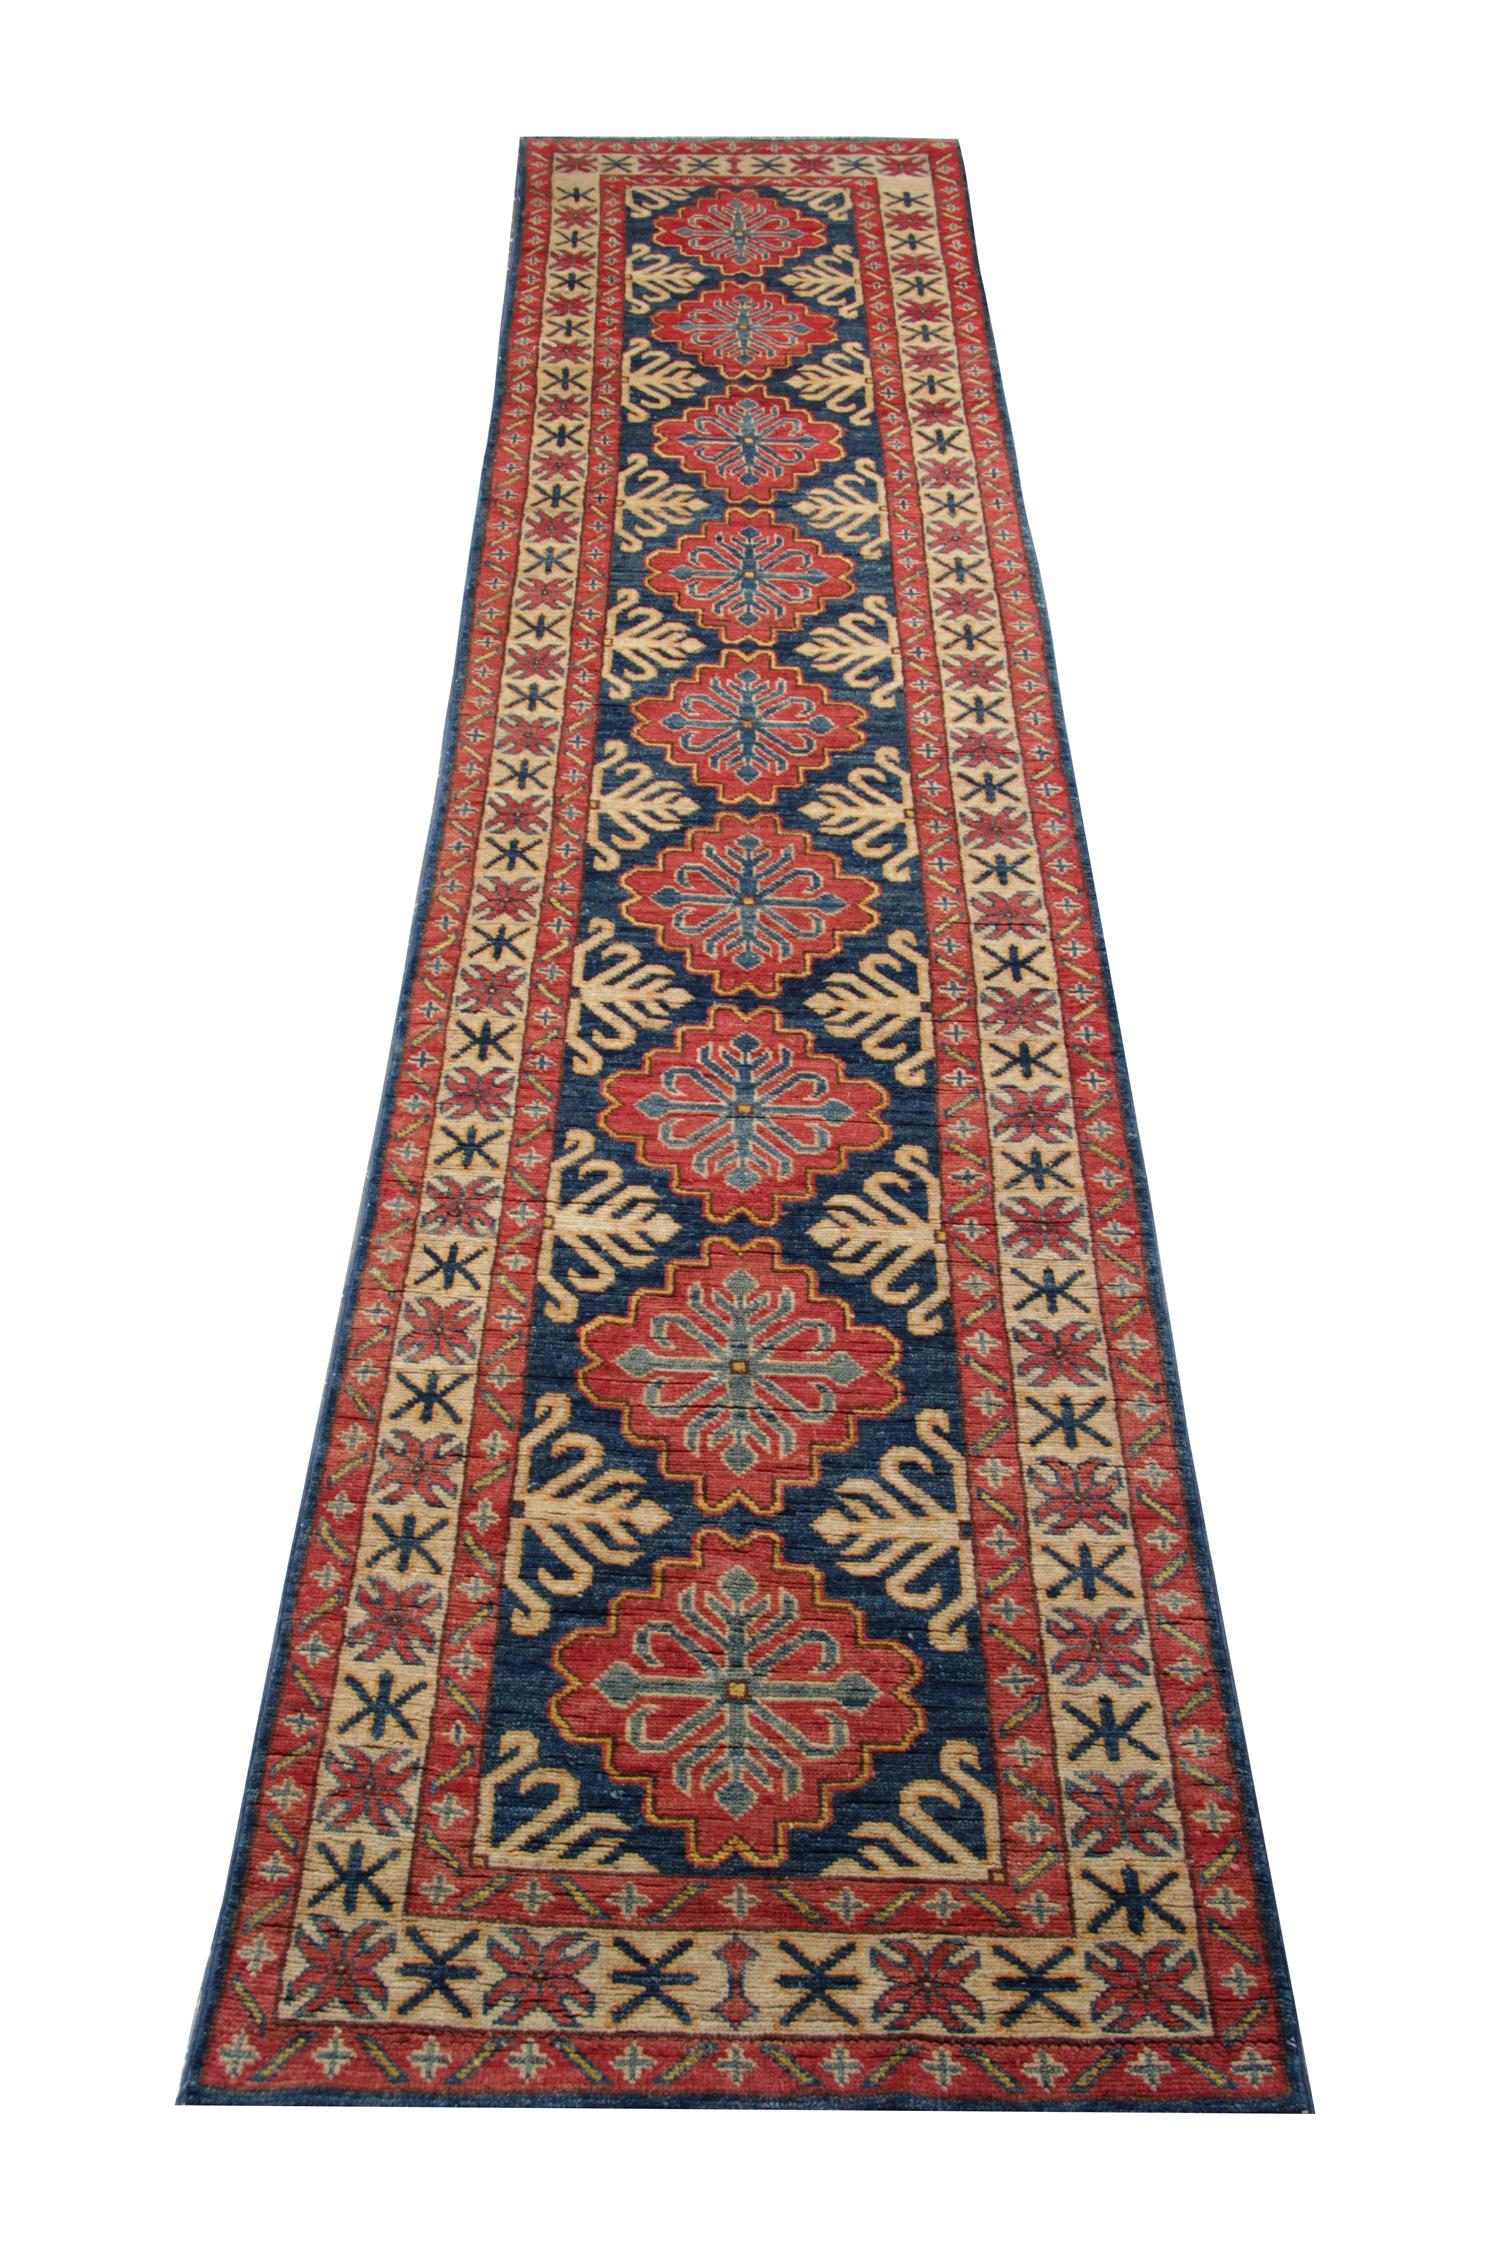 A beautiful new traditional Afghan Kazak runner rug featuring a conventional tribal medallion design woven in accents of red and cream, through the center on an aqua blue field. The design is then finished with a highly-detailed repeat pattern